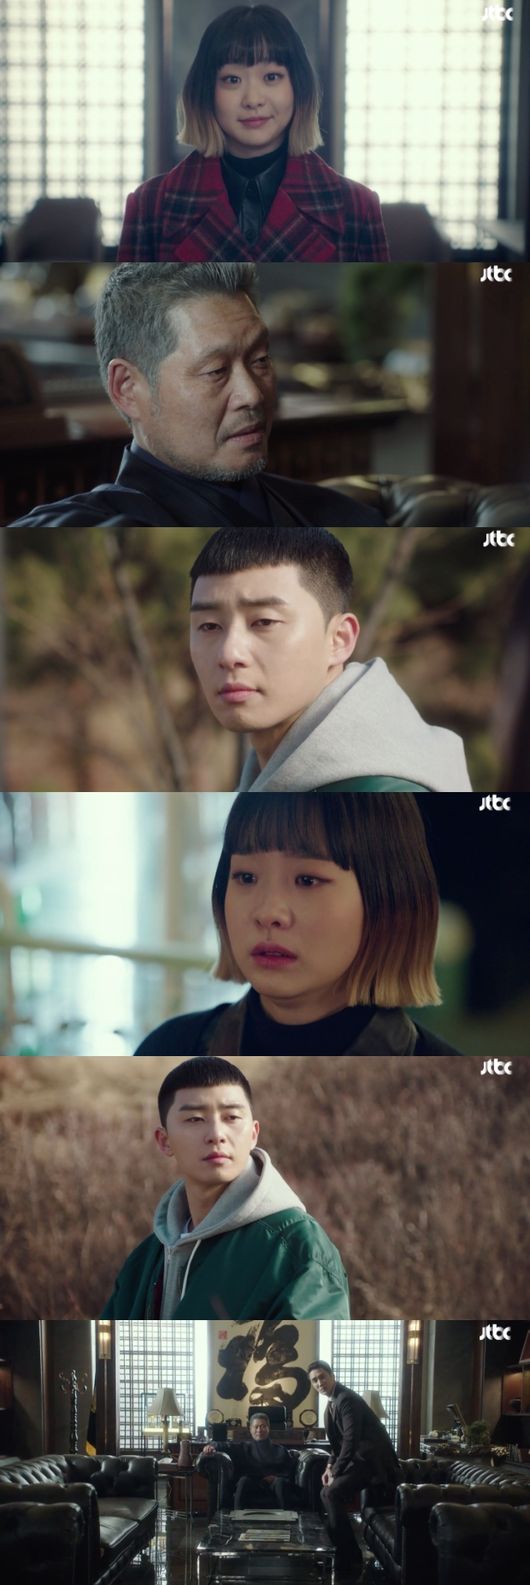 Itaewon Klath Park Seo-joon challenged Yoo Jae-myeong.In the JTBC gilt drama Itaewon Klath (playplay by Gwangjin, directed by Kim Sung-yoon Kang Min-gu), which aired on the 22nd, the process of confrontation between Park Seo-joon and Jang Dae-hee (played by Yoo Jae-myung), chairman of Jangga Group.Chang bought a building with three nights to show his momentum: If you get kicked out of the building, youll open a shop somewhere else, but then youll buy another one.I will live in the building you take over. I thought it was a good investment because the value of the building was raised thanks to the night, he insisted, and what you did to my neck eventually became a job for the long-term.Youre going to run it yourself, arent you? asked Park, dismissing it as a thin club.Youd better sell it a day, if you want to get your rights, Chang said, adding, Tear it back on the first button.If you kneel and apologize, I will not take anything more. We are deeply involved, Park said. My relationship is not in money. I am your enemy. On the day I was expelled from my knees, my father told me he was proud.You have not taken anything from me, and I think strength comes to people, and trust in people makes me hard. I will be stronger, he said.I will continue to lead the night because there are people who believe.Park had previously ordered the Janga group to be led by The Fountainhead (Ahn Bo-hyun) led by director Kang Min-jung (Kim Hye-eun).Then, when he fired the Fountainhead, he offered to help him. As Kang gave him the mission, Jang Dae-hee came to eat at night.In the end, Kang joined hands with Park as a business partner, saying, Lets go to the Fountainhead, inspiration.However, President Ahn made another plan.Its not like you bought the building last night, but its been more than 10 years since you bought the building, said Oh Su-ah (Kwon Na-ra).In terms of social ideas, there were times when Choices were not right, but even if they were not right, the Choices of the chairman I saw were for the sake of the family.But it is not a purchase of this building. Jang Geun-soo (Kim Dong-hee), who learned about his father and brothers mistakes through Joe-yool Lee (Kim Dae-mi), decided to leave the night.He explained to Roy that Im going to quit, and that its just going to be better. This is because Joe-yol Lee had been working hard for a night.To Joe-yool Lee, who encouraged his hard work, he said, You are not qualified as a manager. So Joe-yool Lee said, Thats the deal.How long will you be in the first place in the franchise? How can you do that? Roy was angry that the act of doing for him was cutting people.Joe-yool Lee said, I am this store manager.Im not sure that were getting kicked out of here and this is not going to happen anymore, he said. Ive been put to my boss.We need to offer a real alternative, said Park, who assured him he would buy a building.He recovered his investments and bought the building on Gyeongri-dan-gil at a low price and opened the night again, but it is not easy because of the interference of Chairman Chang.He recalled the words of Roy and vowed to kneel before him.I cant imagine a night without Seo-yool Lee, Park told Osua.Joe-yool Lee met Chang with a relaxed smile.While the fight between Chairman Chang, who continues the counterattack of counterattack, and the head of the head of the head, who summoned Joe-yol Lee, raises the curiosity.Itaewon Klath captures broadcast screen